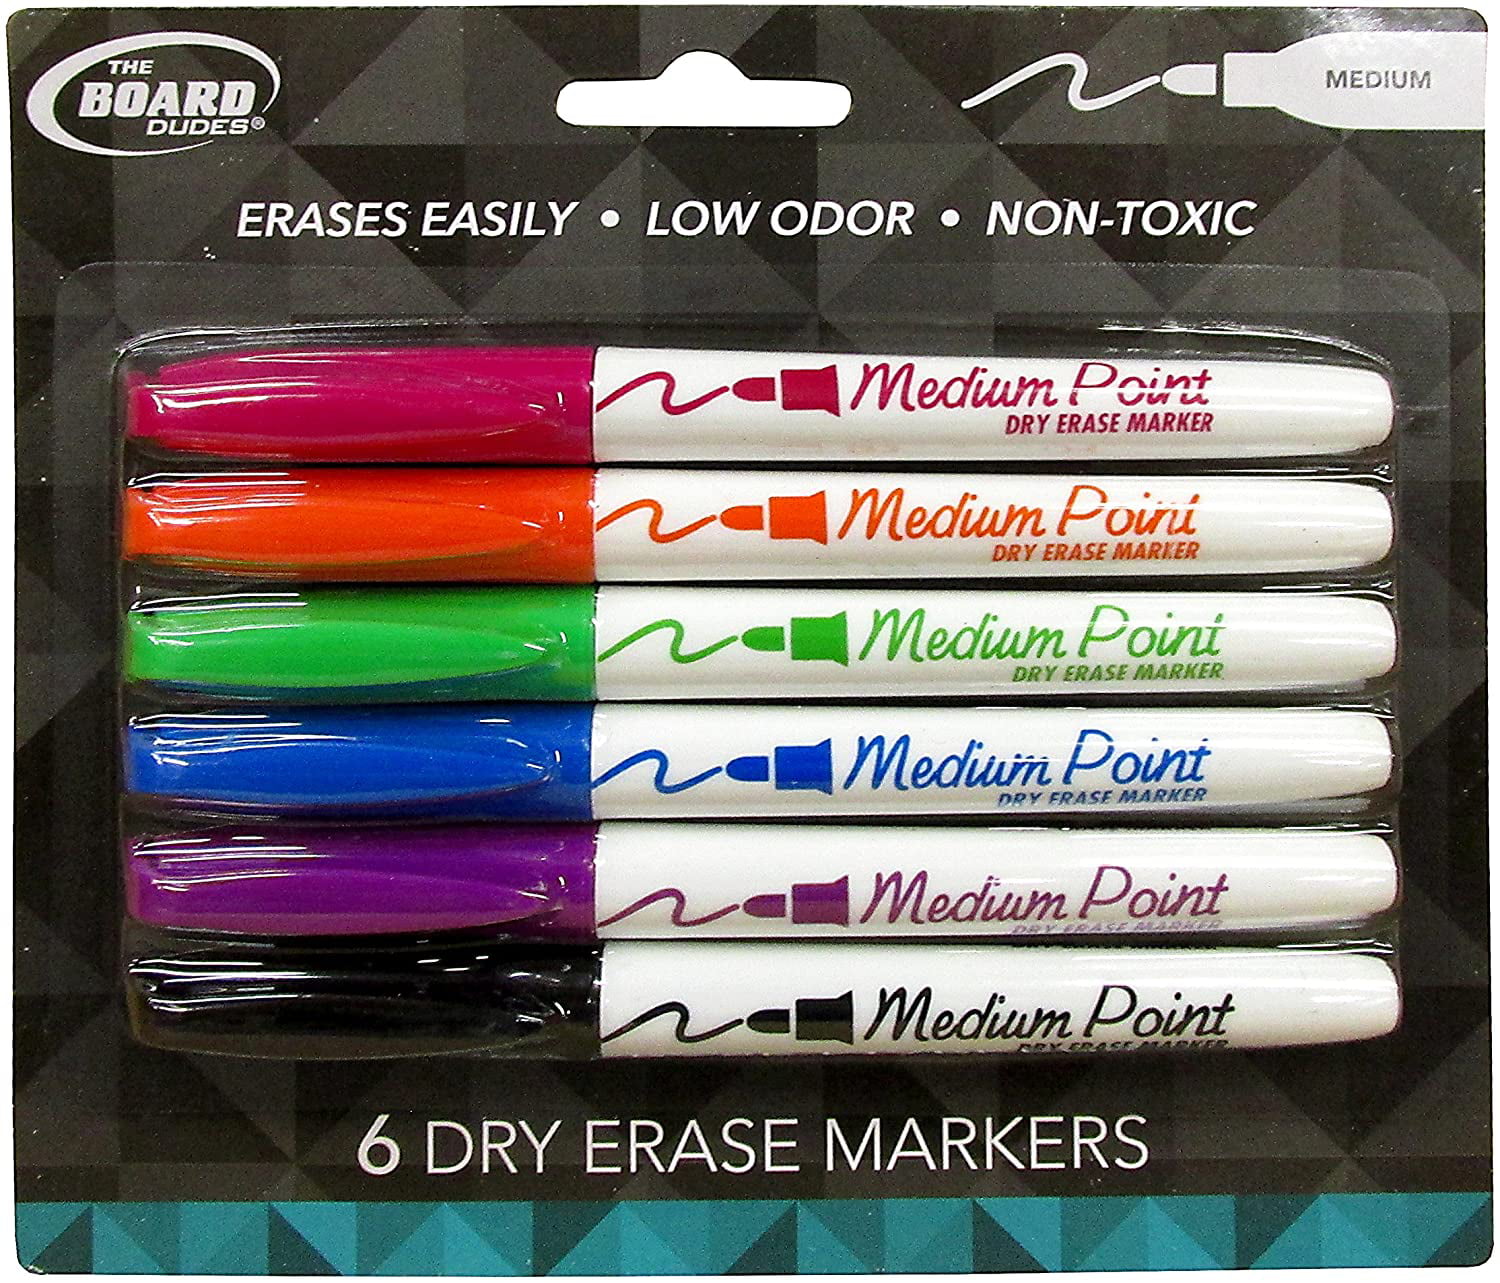 6 Piece Medium Point Dry Erase Markers The Board Dudes Neon Fun Art Learn 